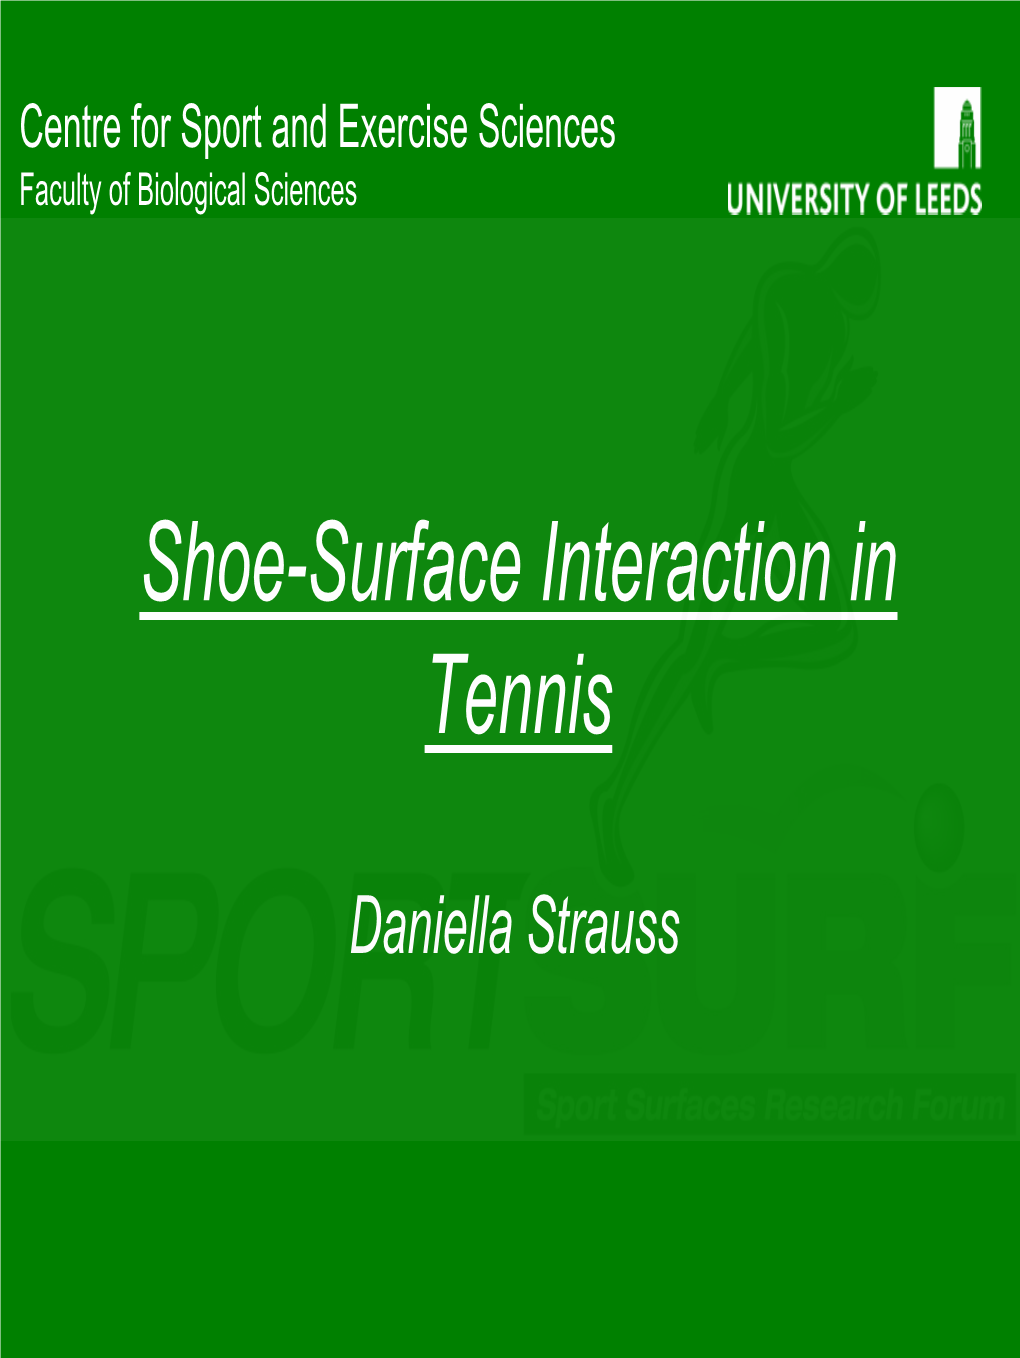 Shoe-Surface Interaction in Tennis